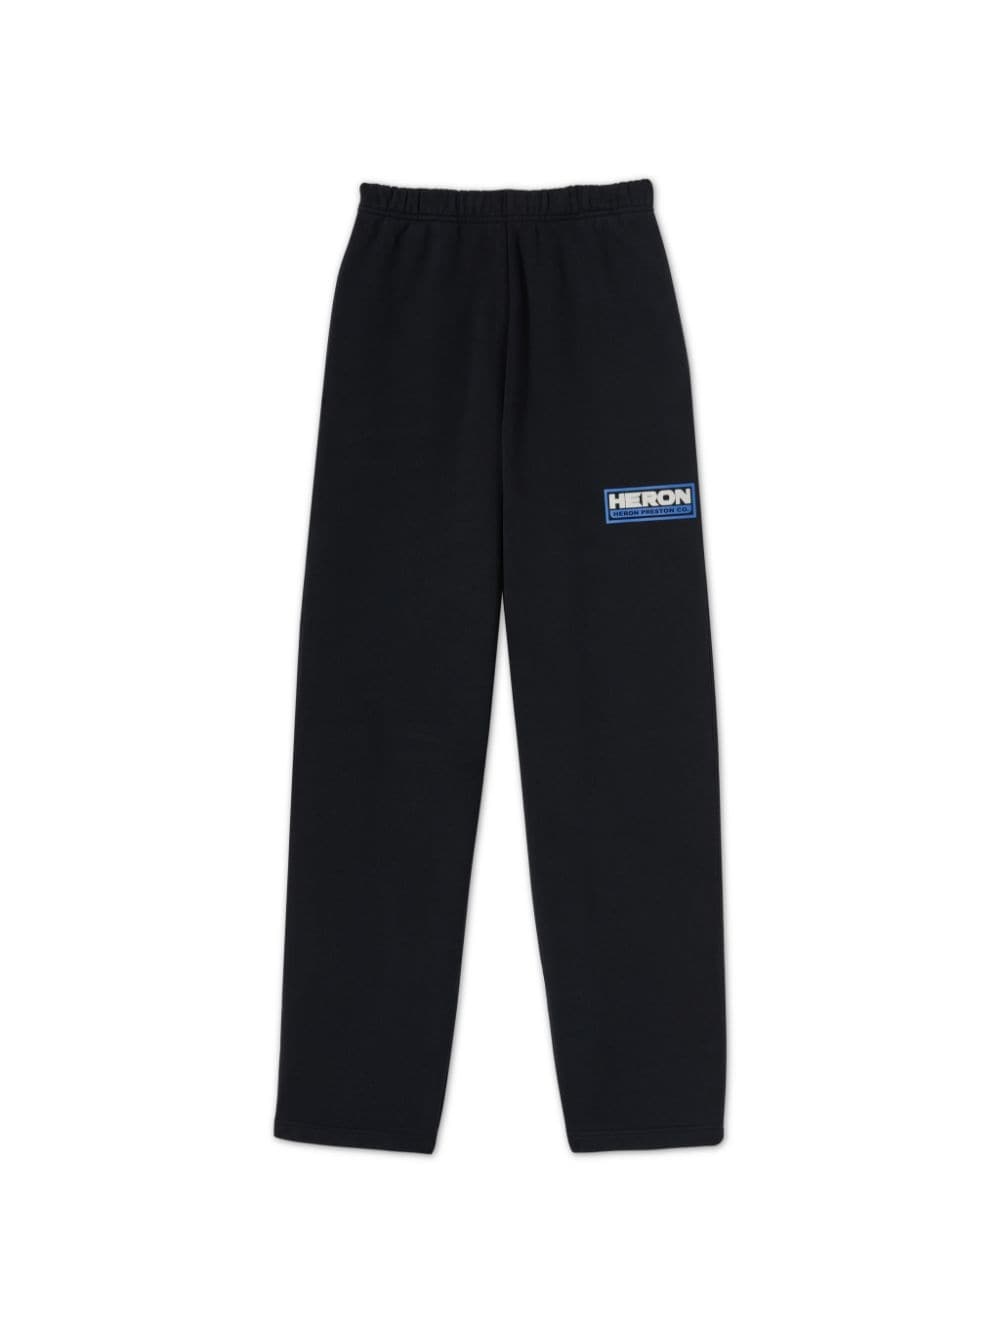 Real Estate jersey track pants - 1